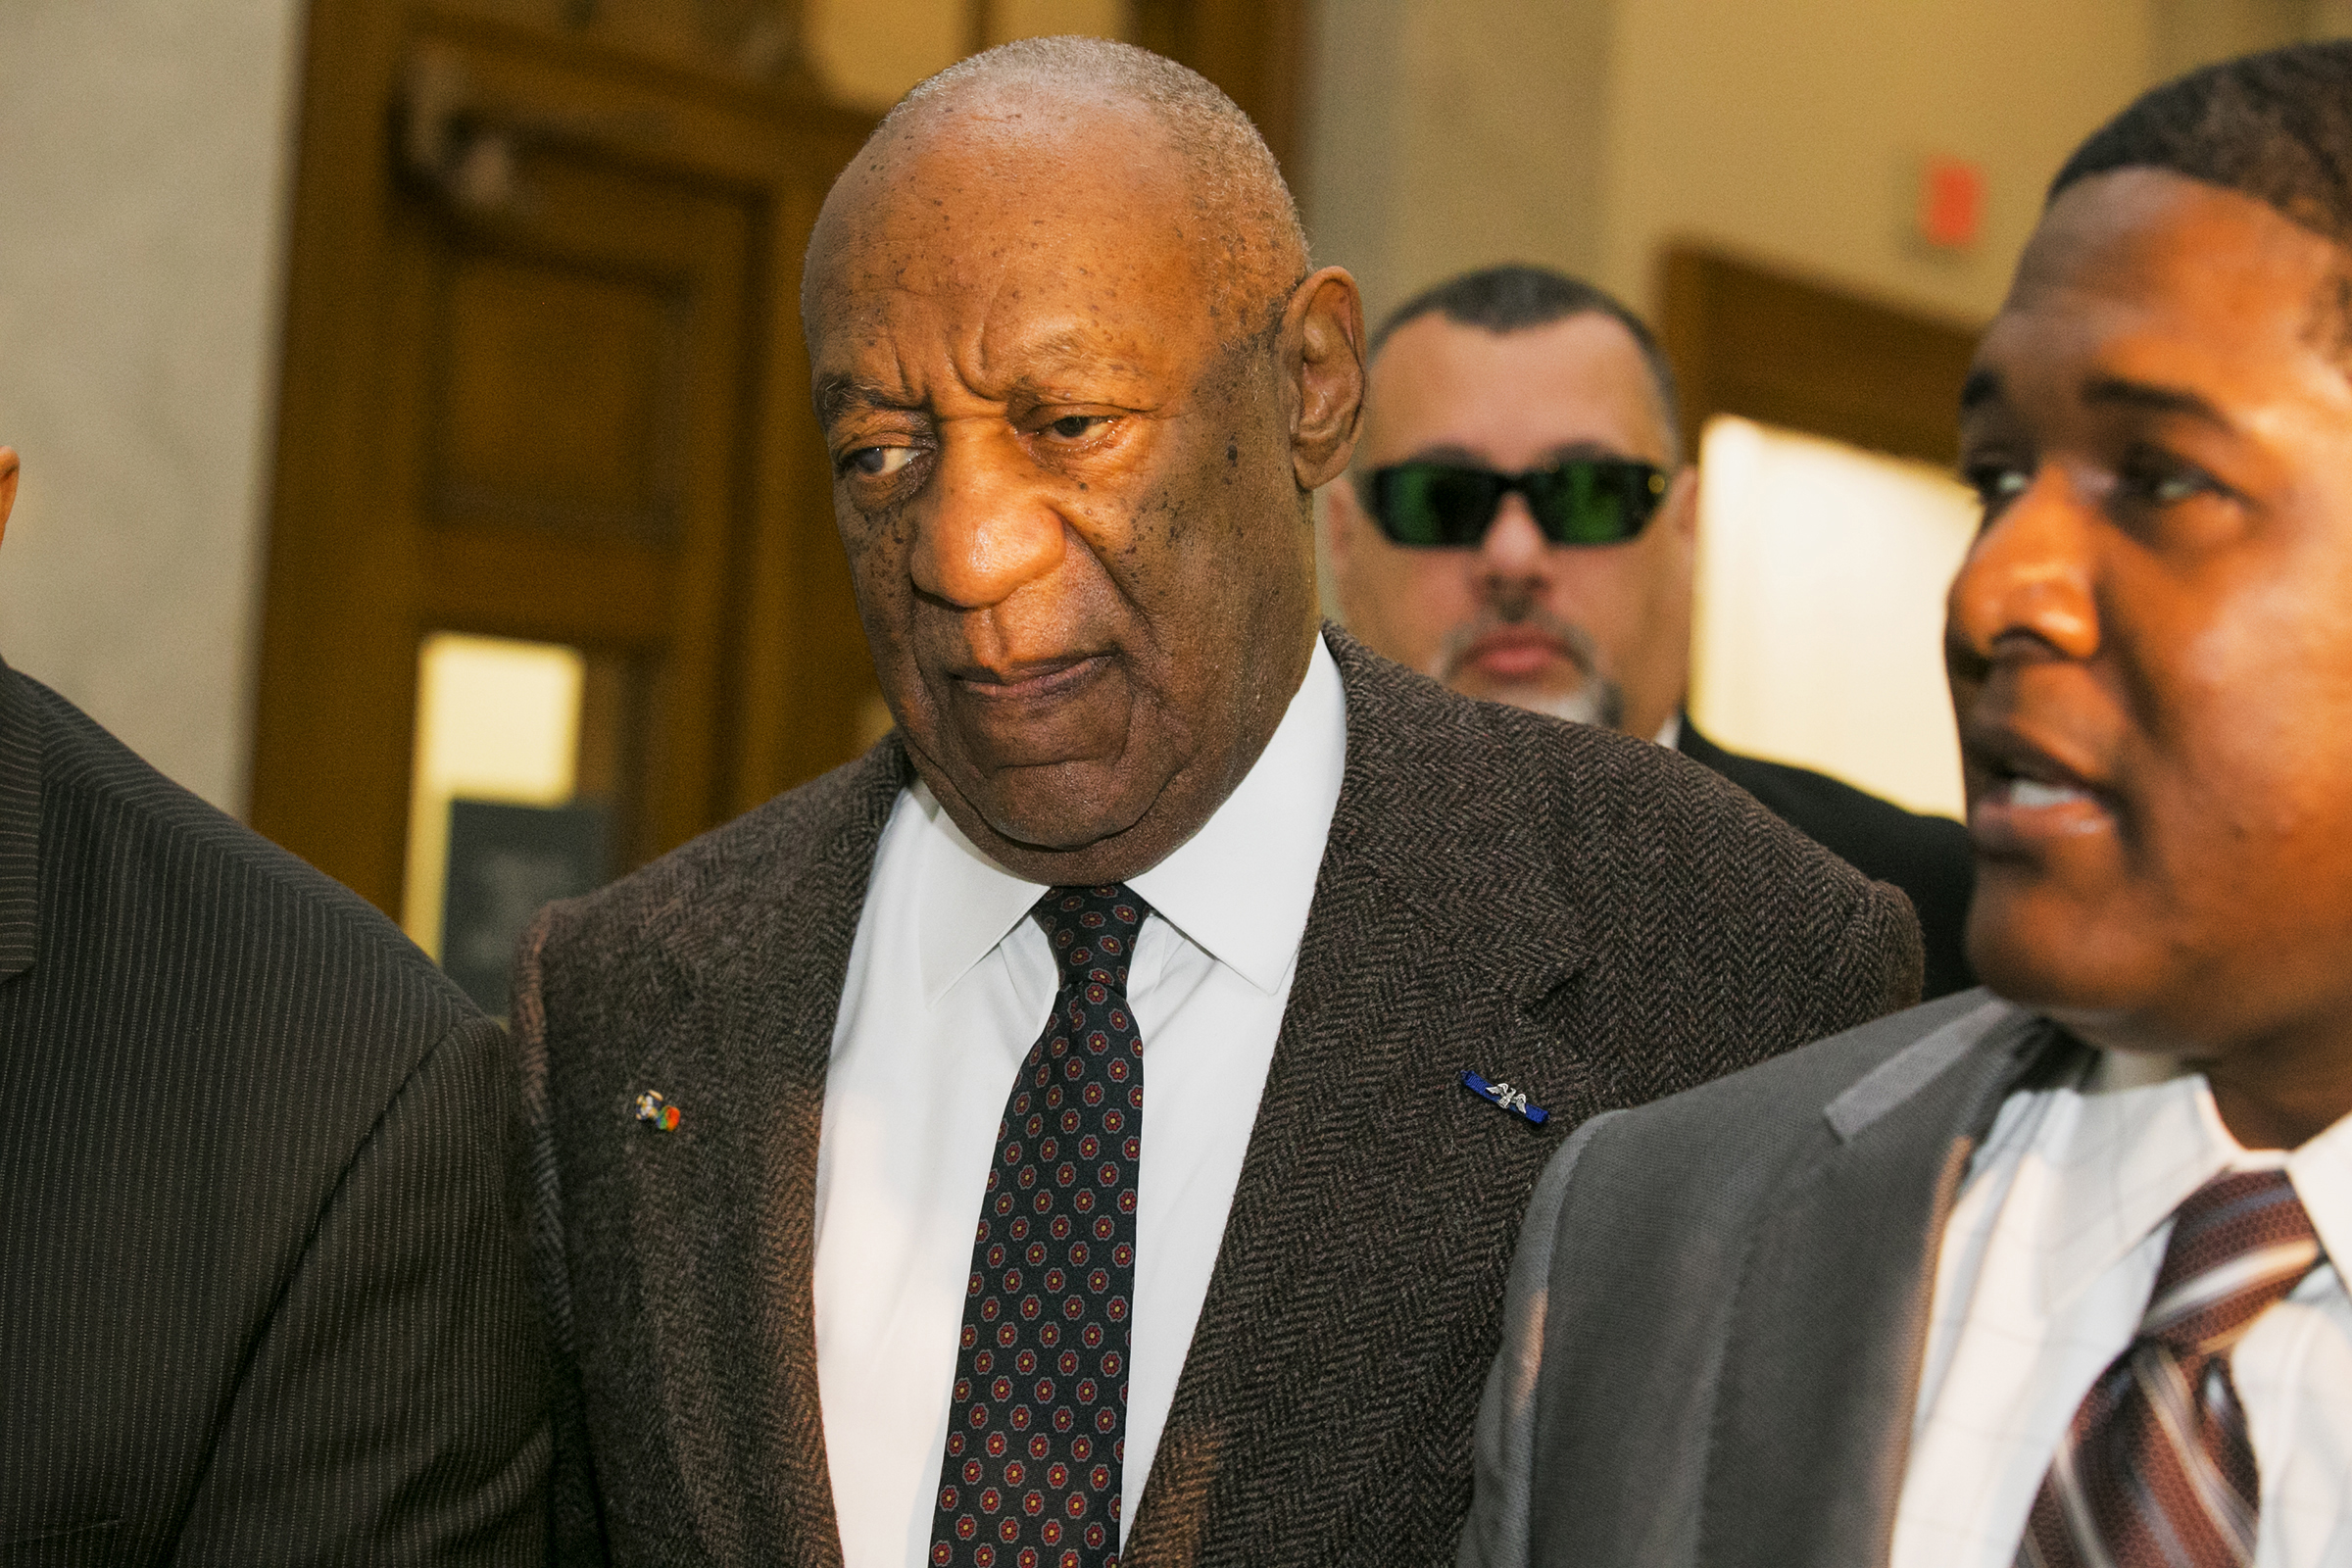 Actor and comedian Bill Cosby arrives for the second day of hearings at the Montgomery County Courthouse in Norristown, Pennsylvania